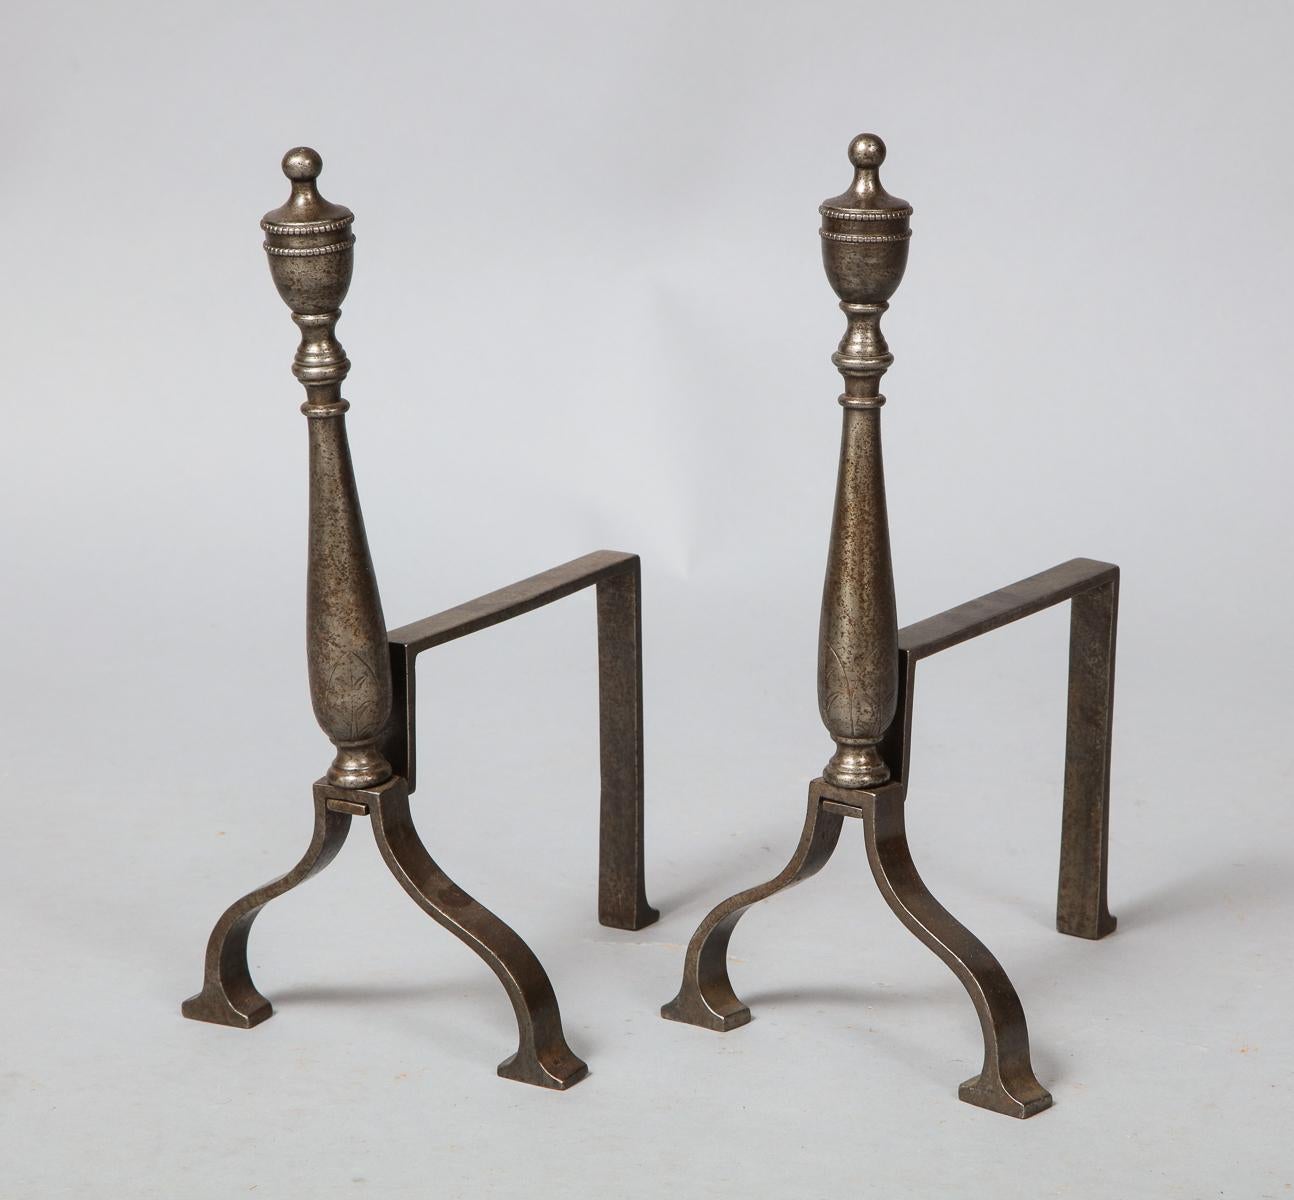 Fine pair of Adam style tool rests, the urn finials and balustrade shafts with etched decoration and standing on ogee legs and square feet. Originally used as rests for fire tools in front of the hearth, these could also serve as andirons in very